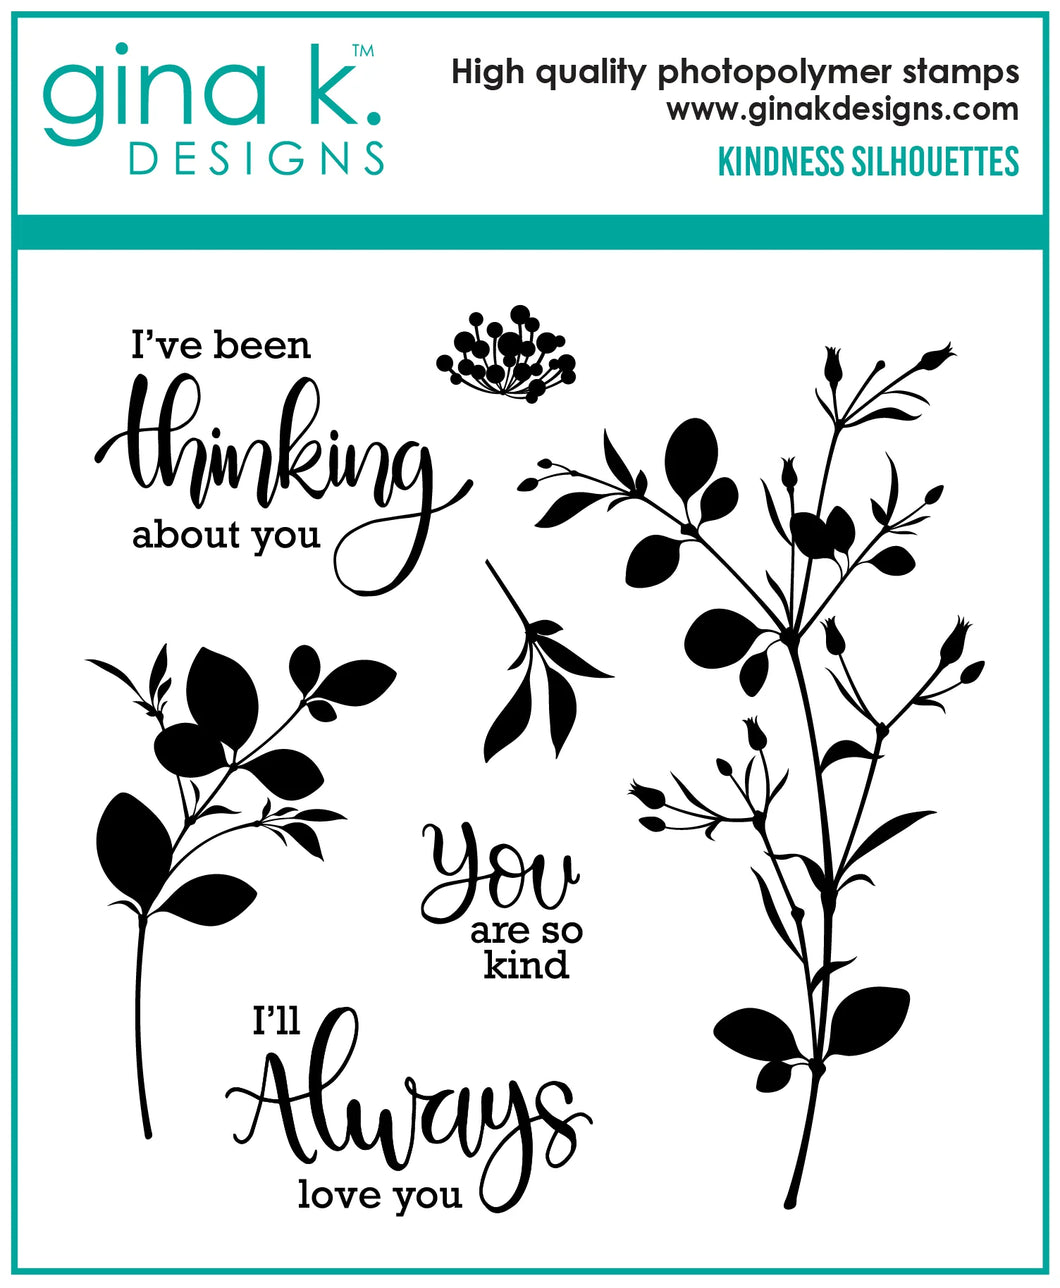 Gina K. Designs - Stamp - Kindness Silhouettes. Kindness Silhouettes is a stamp set by Gina K Designs. This set is made of premium clear photopolymer and measures 4